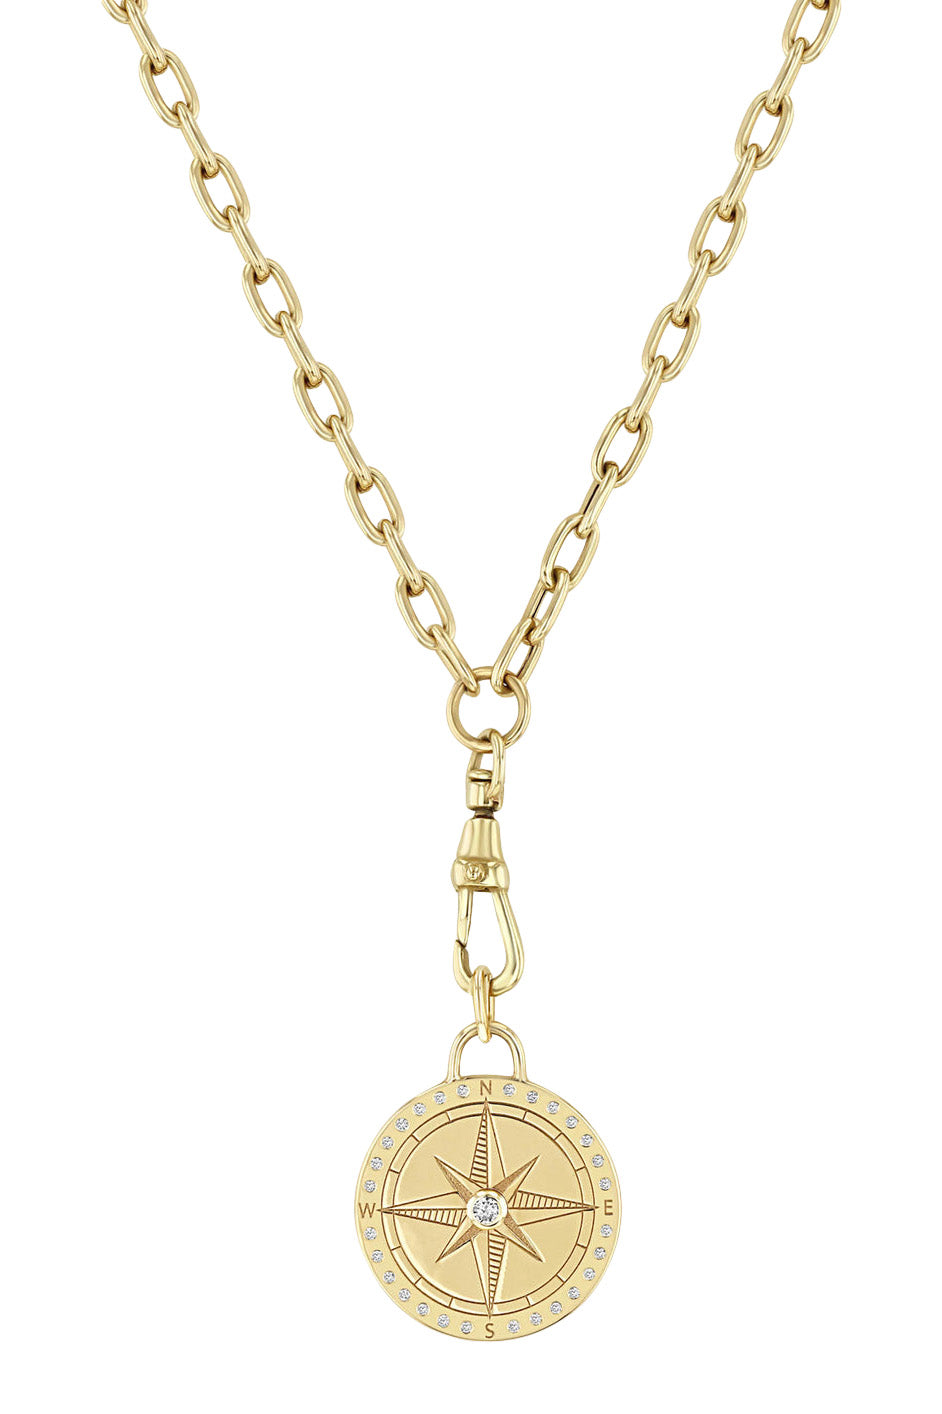 Zoe Chicco Medium Compass Medallion Chain with Clasp Necklace in 14k Yellow Gold